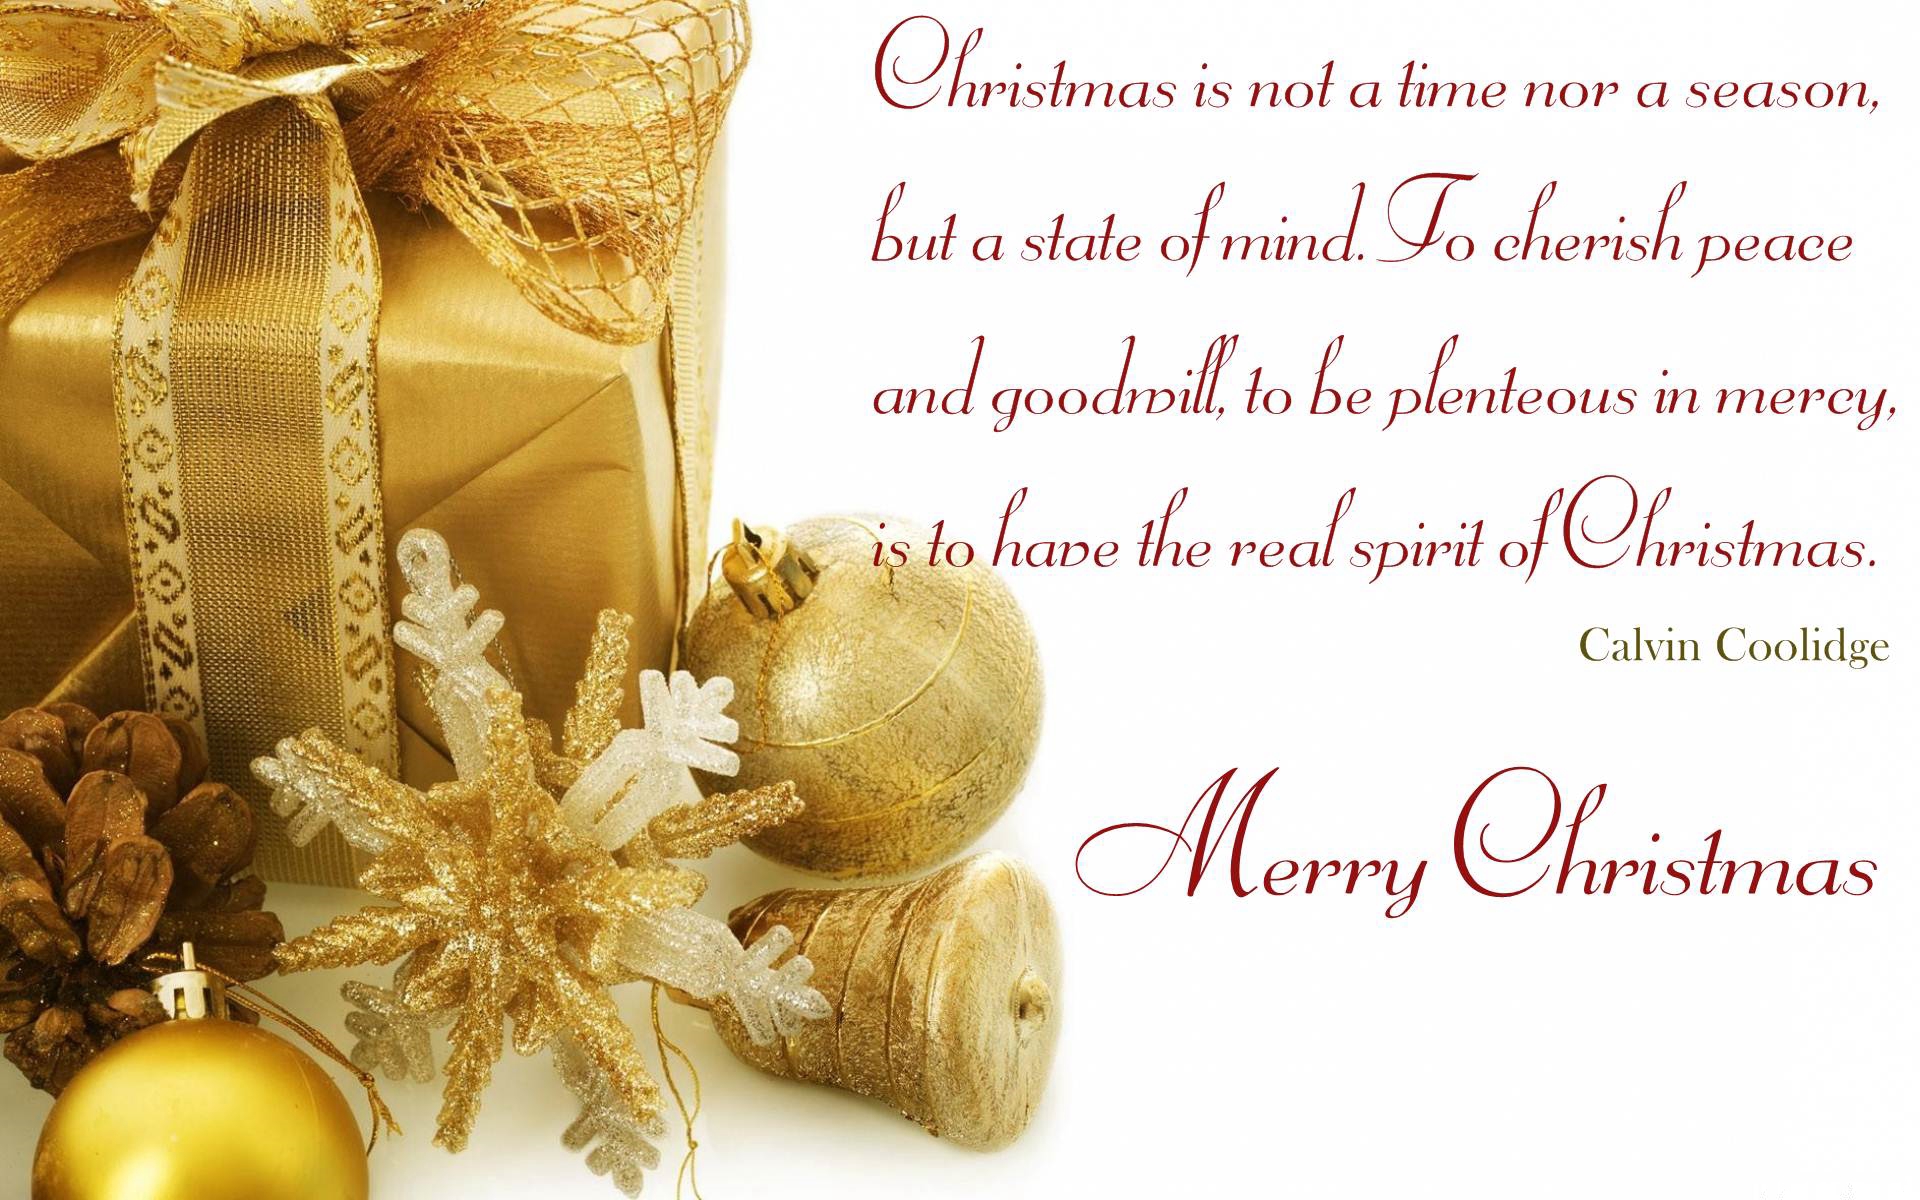 Christmas Greetings Picture Quotes 2014